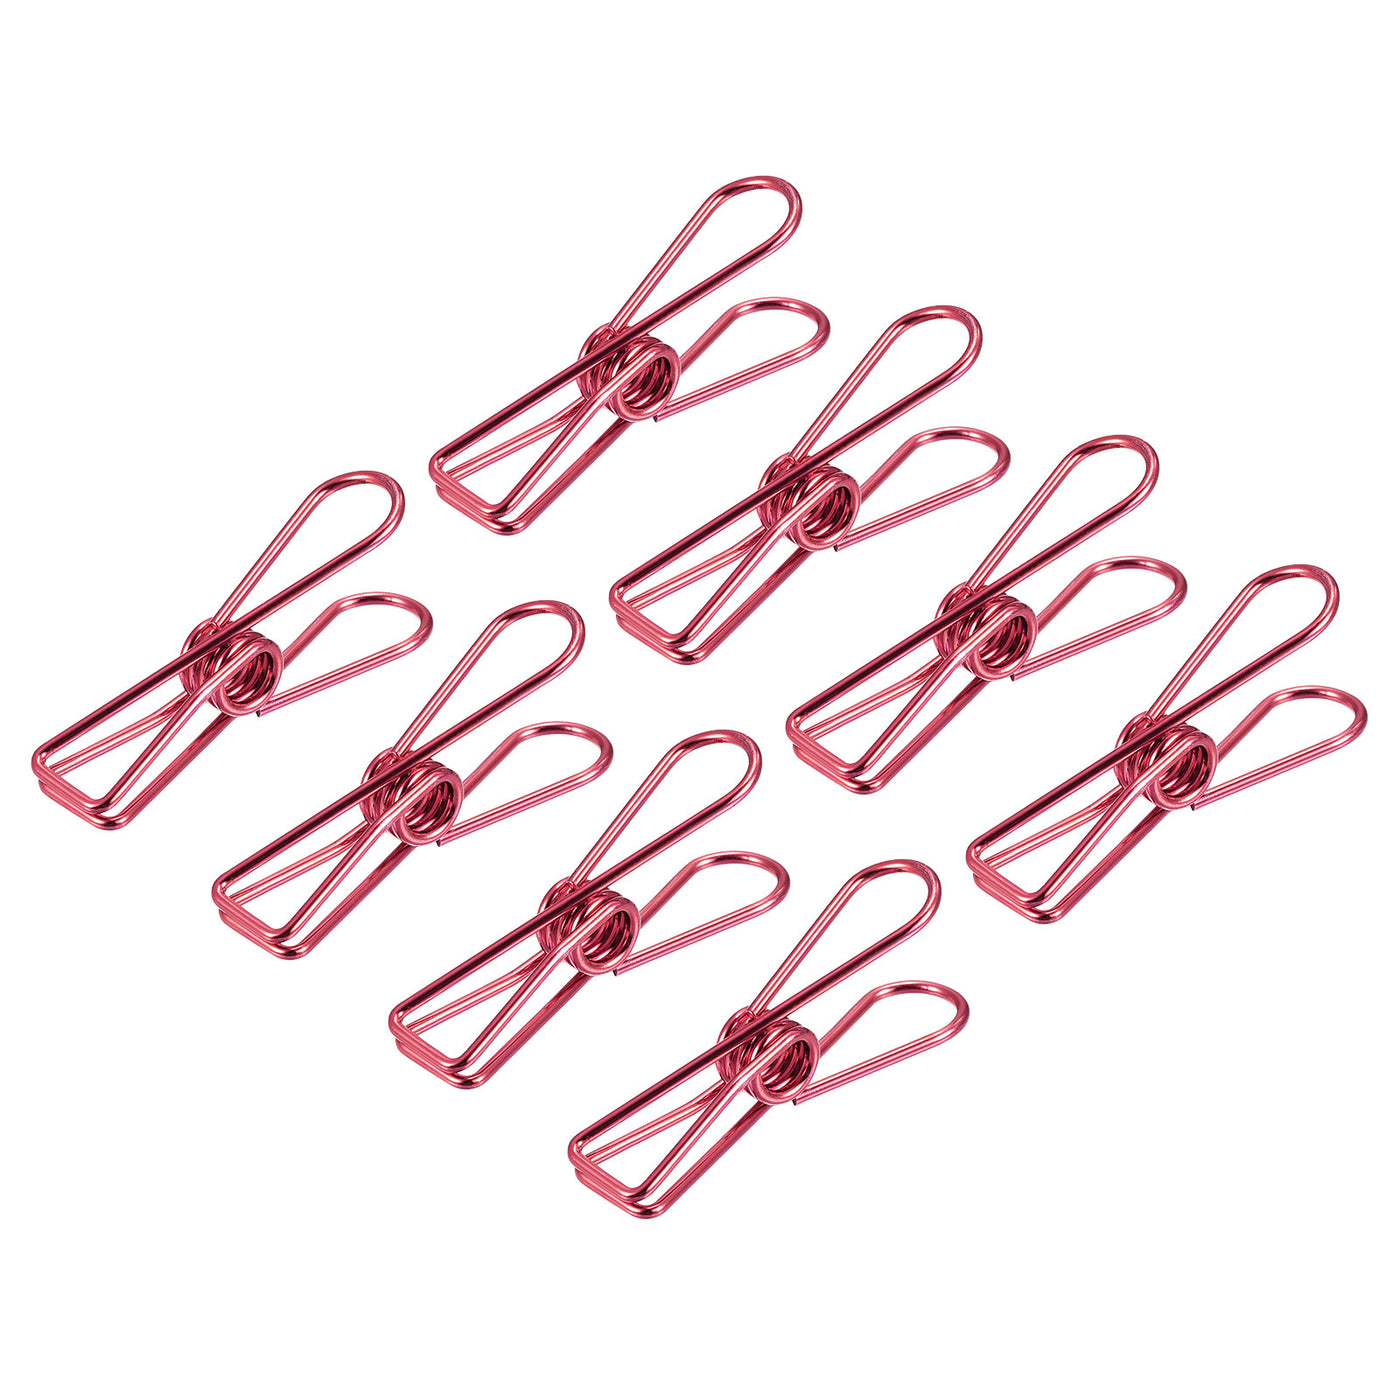 uxcell Uxcell Tablecloth Clips, 32mm Carbon Steel Clamps for Fixing Table Cloth, Red 16 Pcs